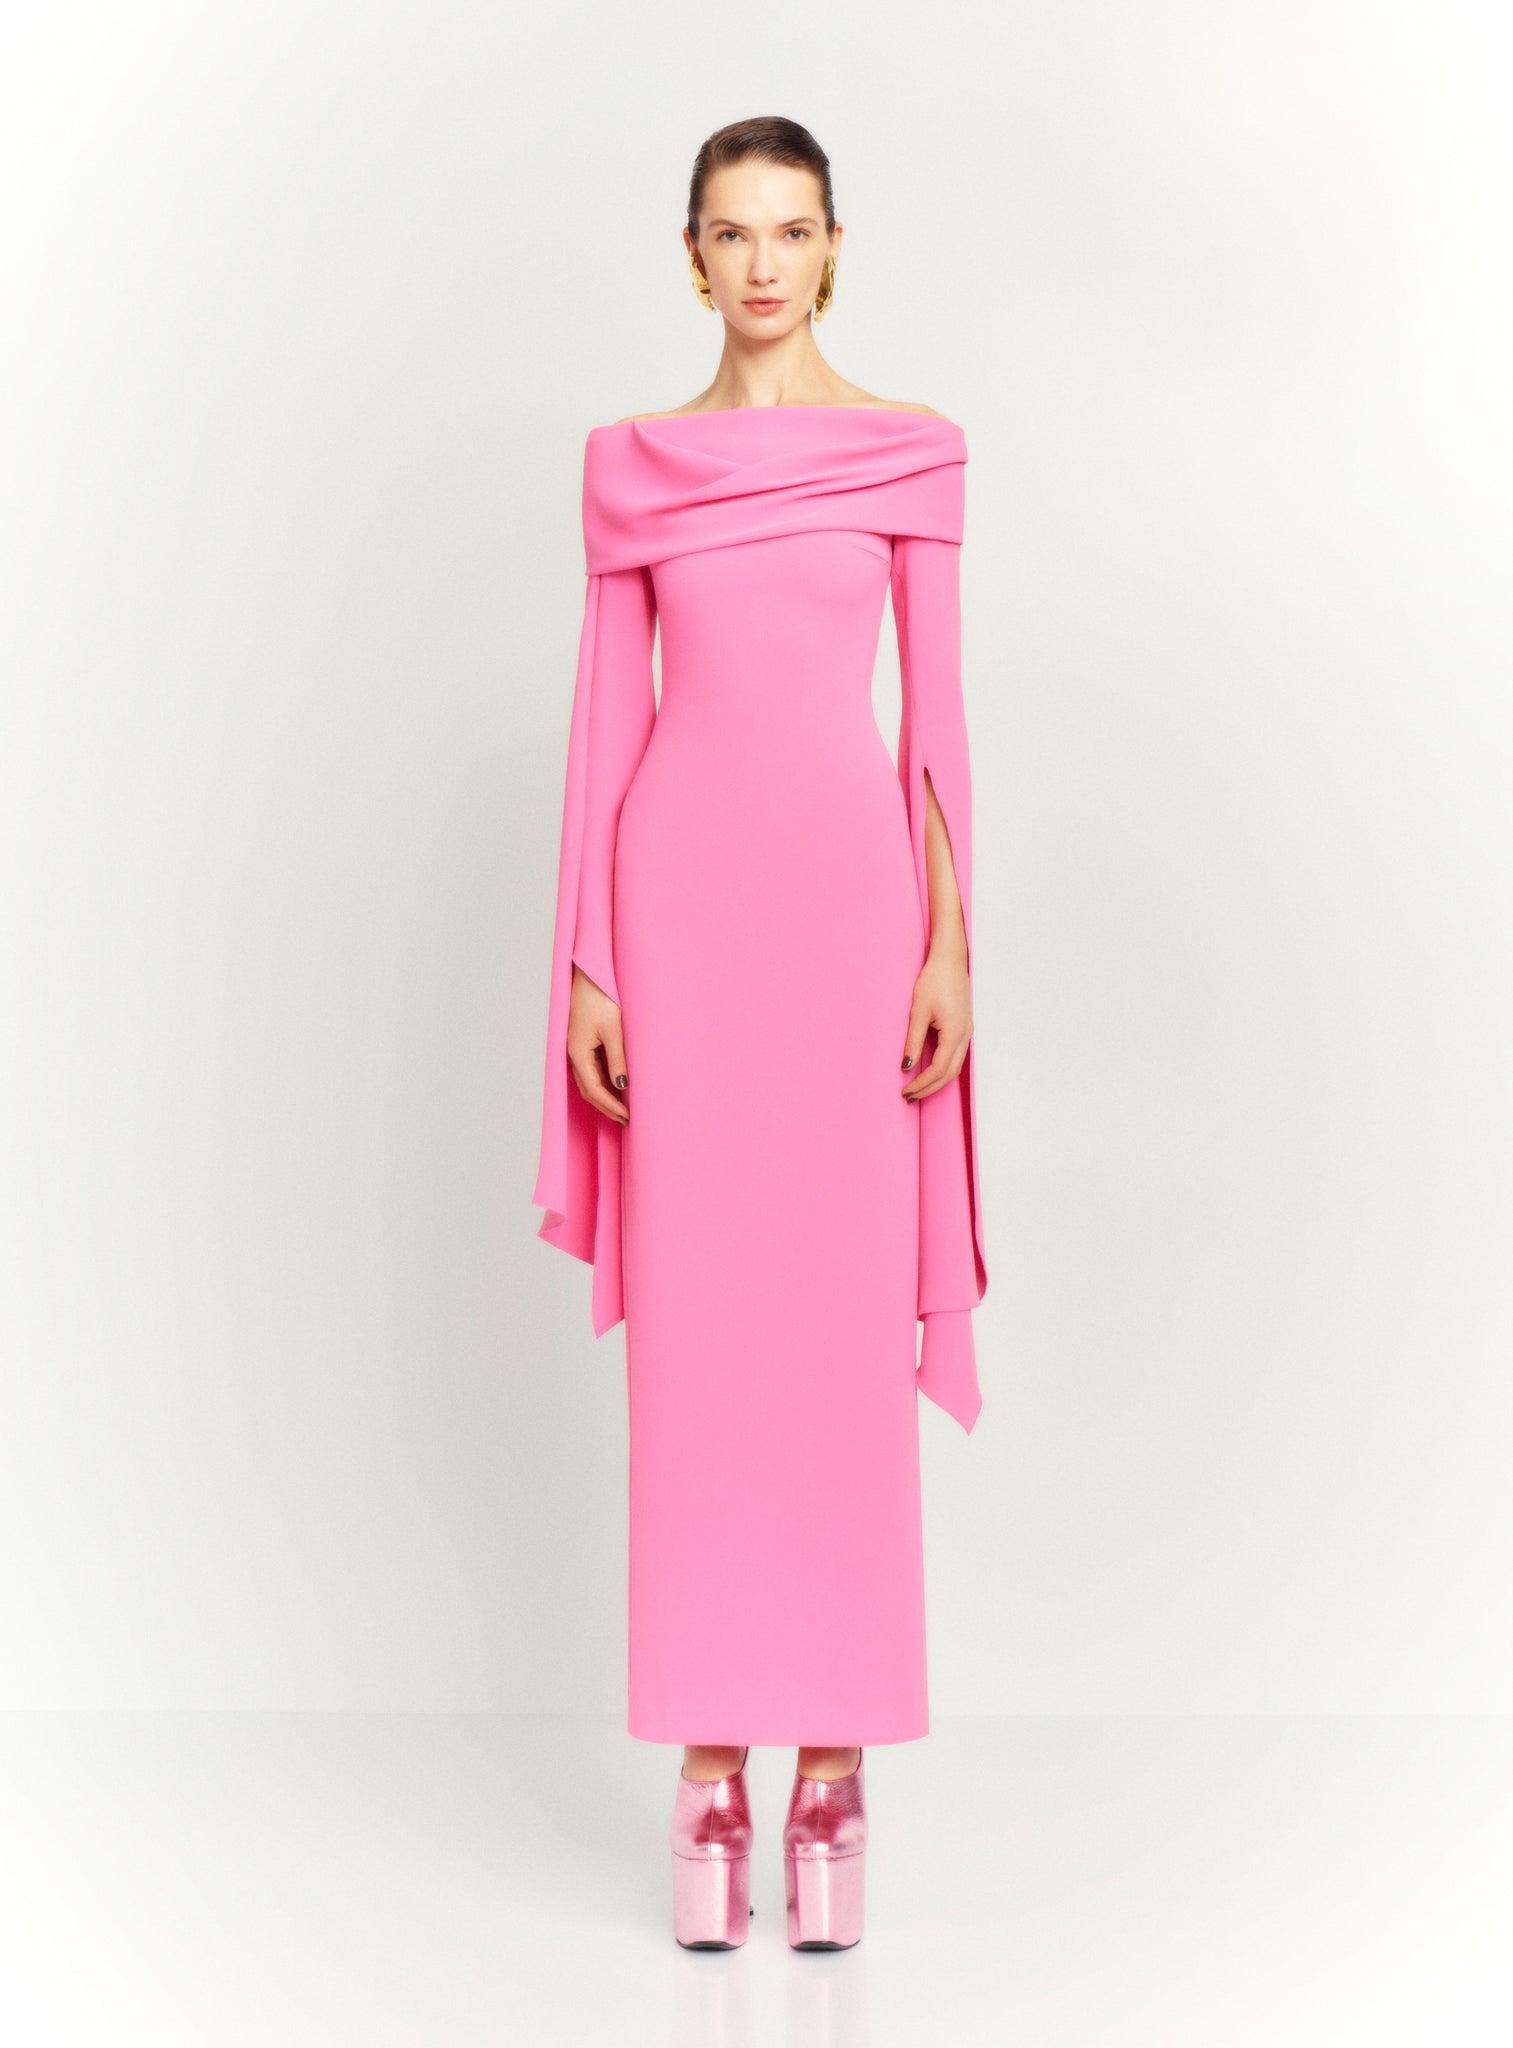 The Arden Maxi Dress in Light Pink